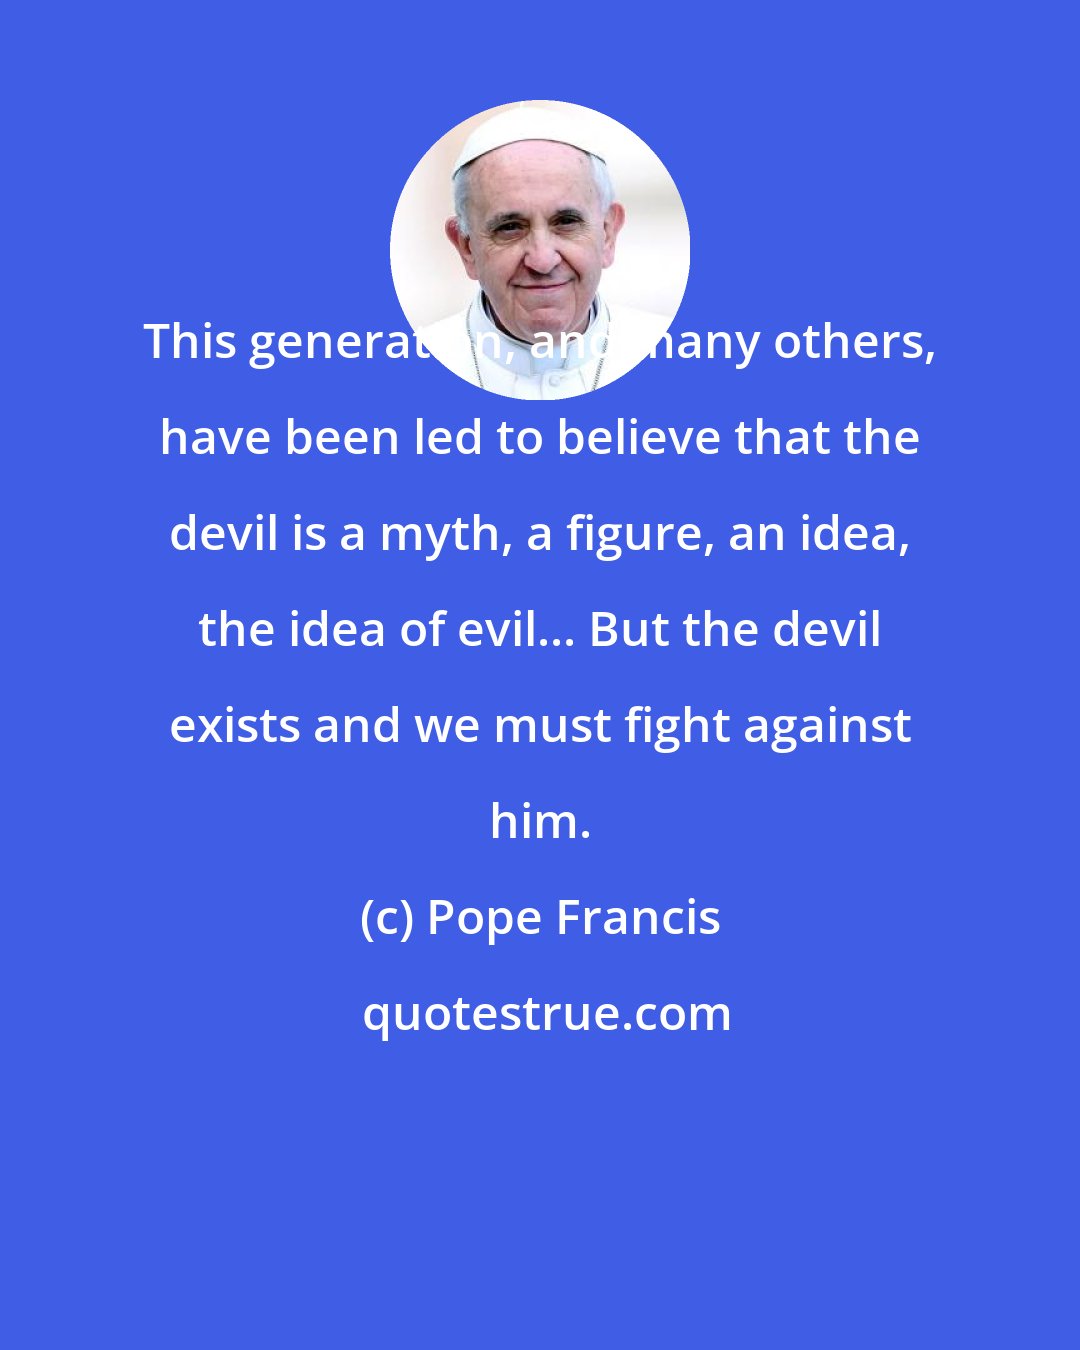 Pope Francis: This generation, and many others, have been led to believe that the devil is a myth, a figure, an idea, the idea of evil... But the devil exists and we must fight against him.